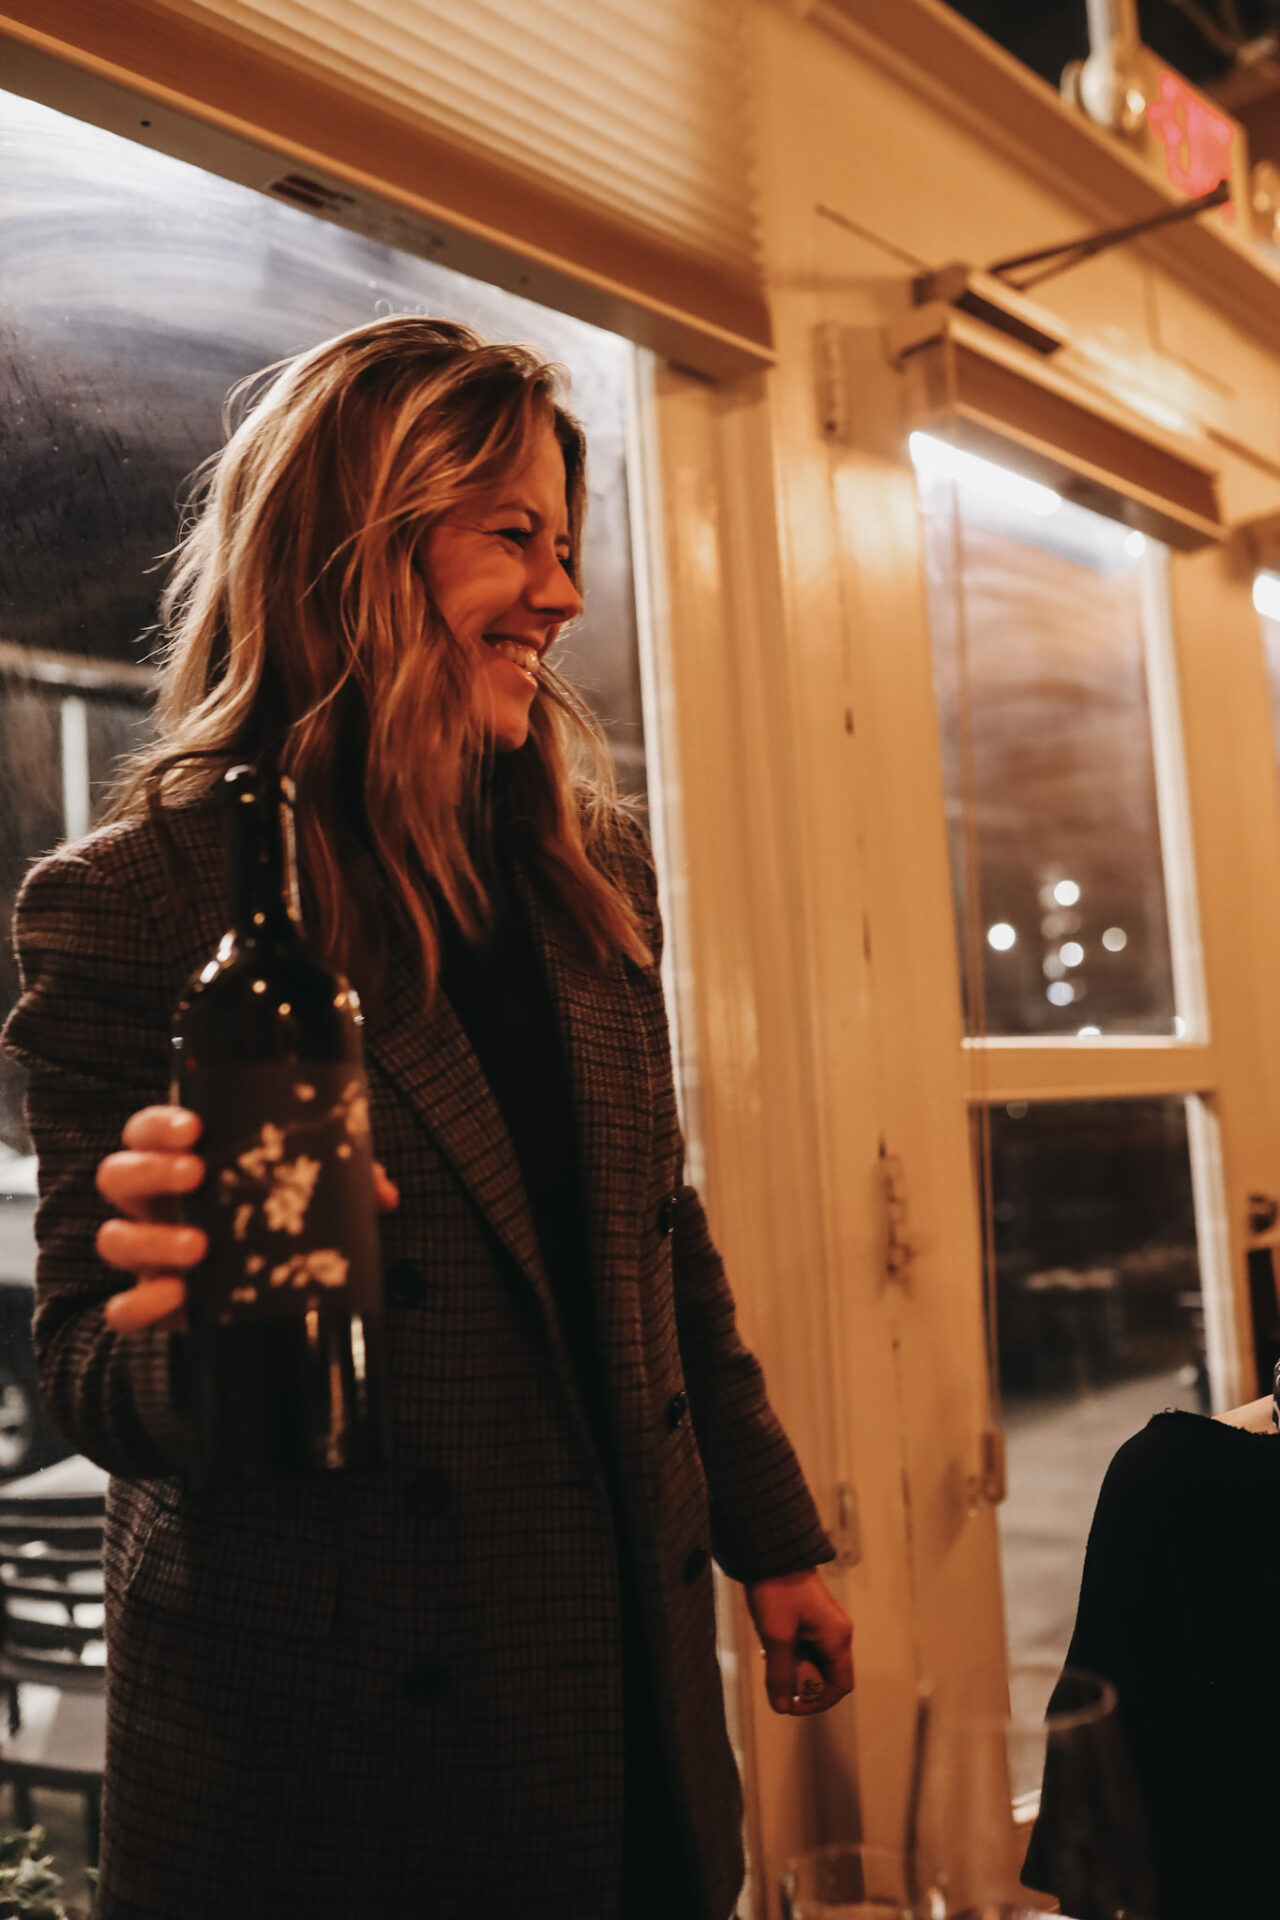 Ashley Trout holding a bottle of Brook & Bull wine